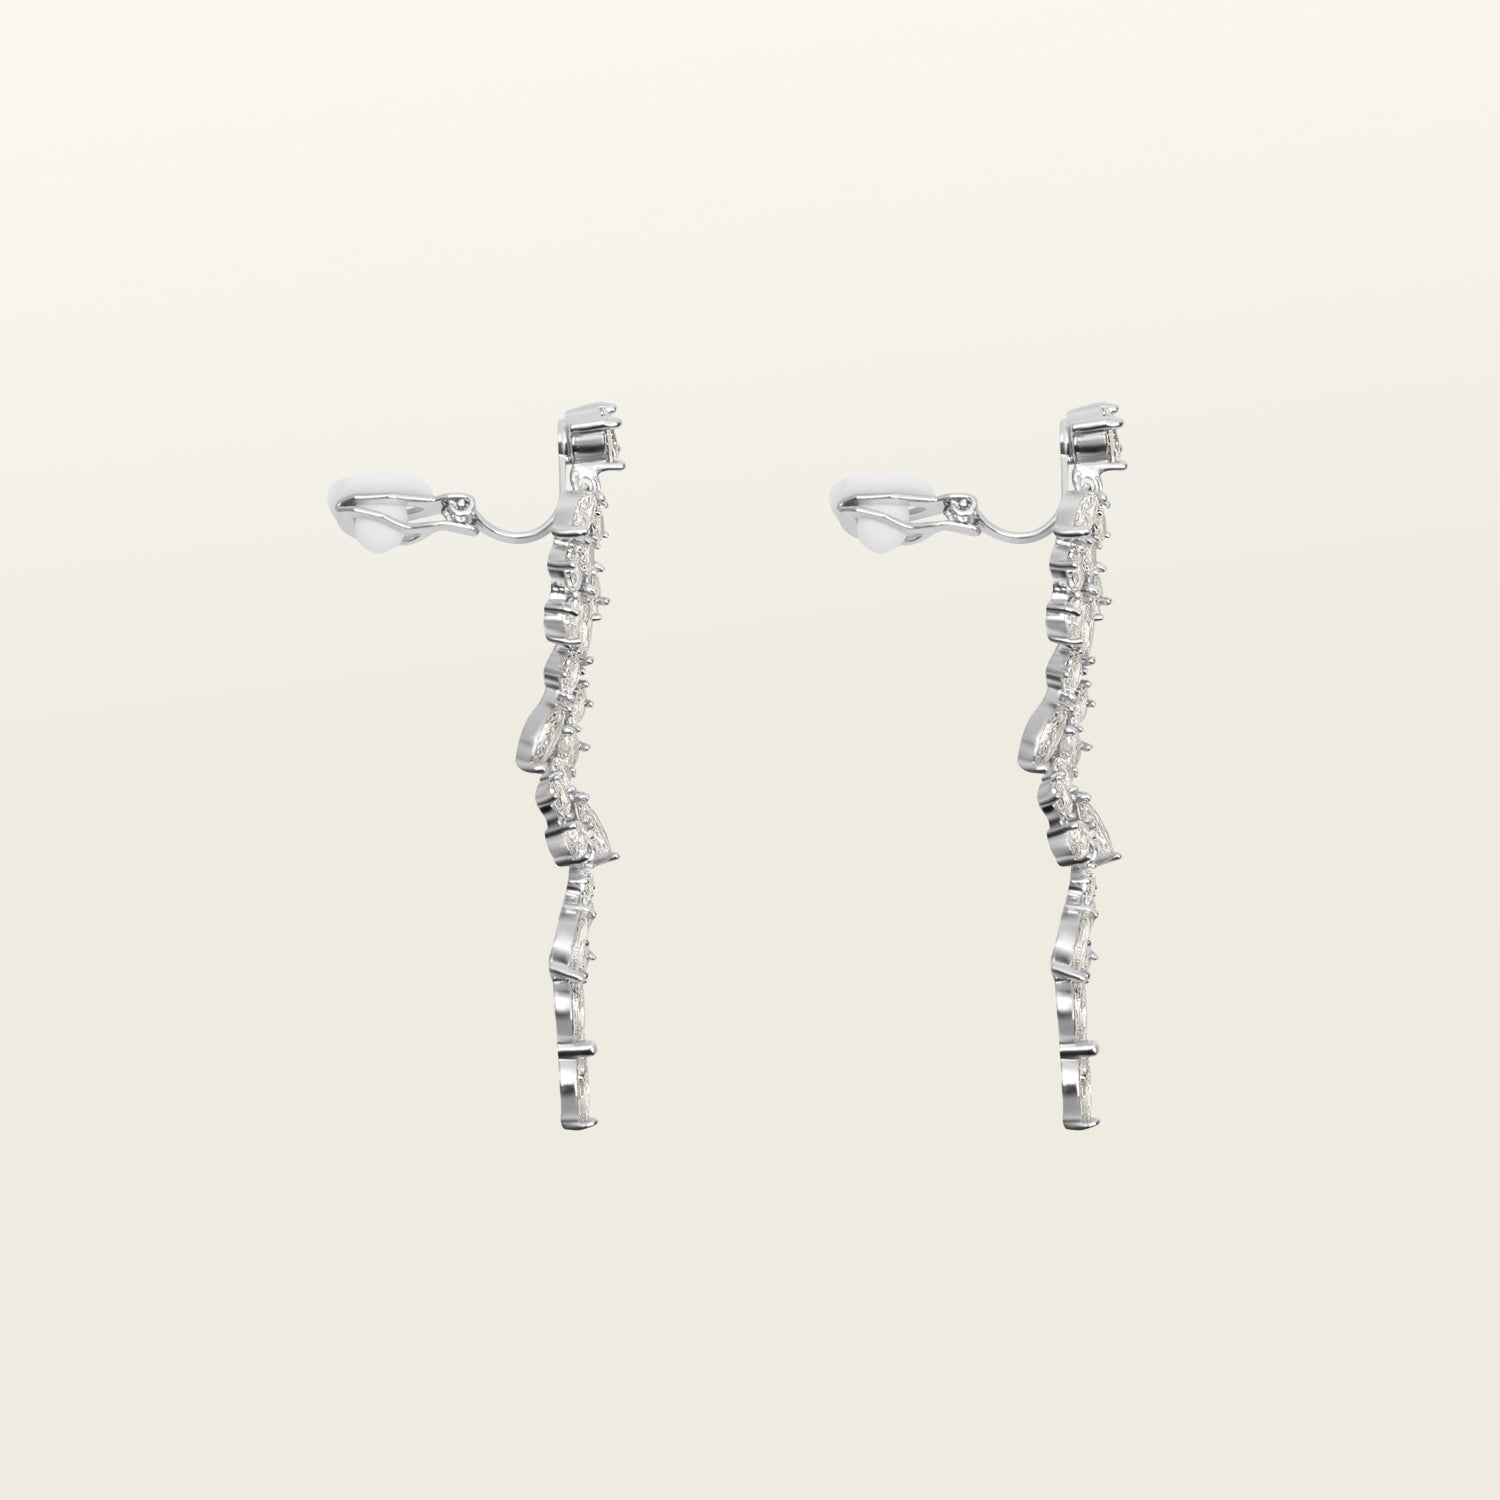 Image of the Cascade Chandelier Clip On Earrings, effortless elegance is yours with these Clip-On Hoop Earrings. Crafted from a luxurious combination of Silver tone copper alloy and Cubic Zirconia, these stylish earrings provide secure closure with their removable rubber padding. Lead/Nickel/Cadmium free, these glamorous earrings are the perfect addition to any ensemble.